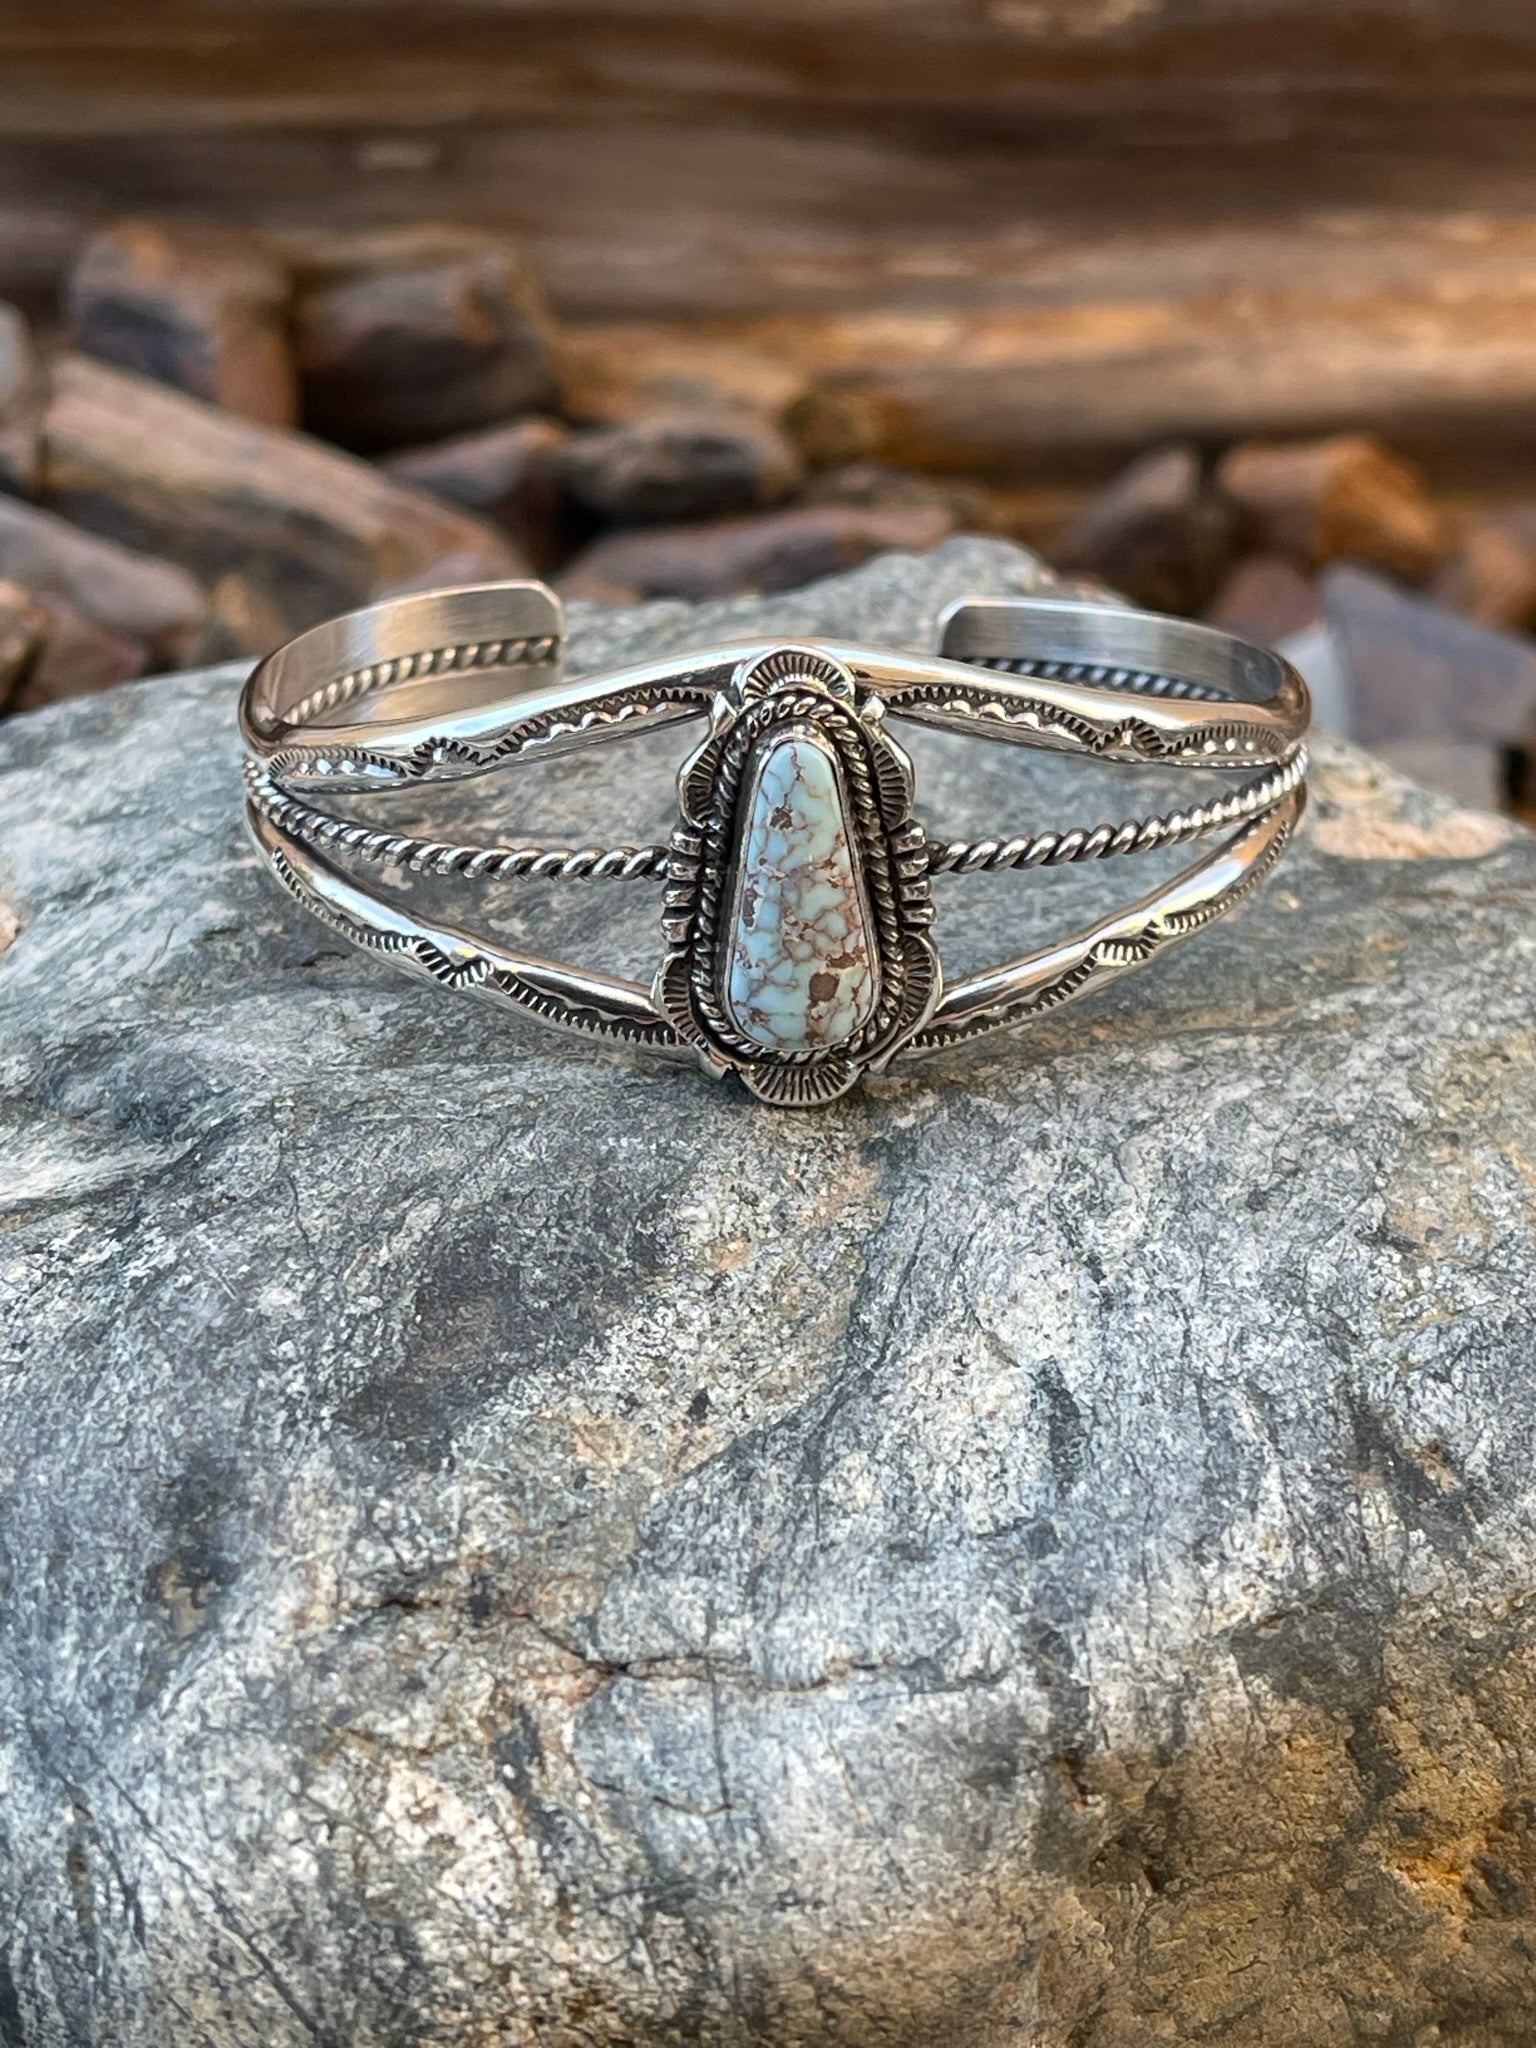 Signature Handmade Sterling Silver Dry Creek Turquoise Bracelet with Stamp Detail